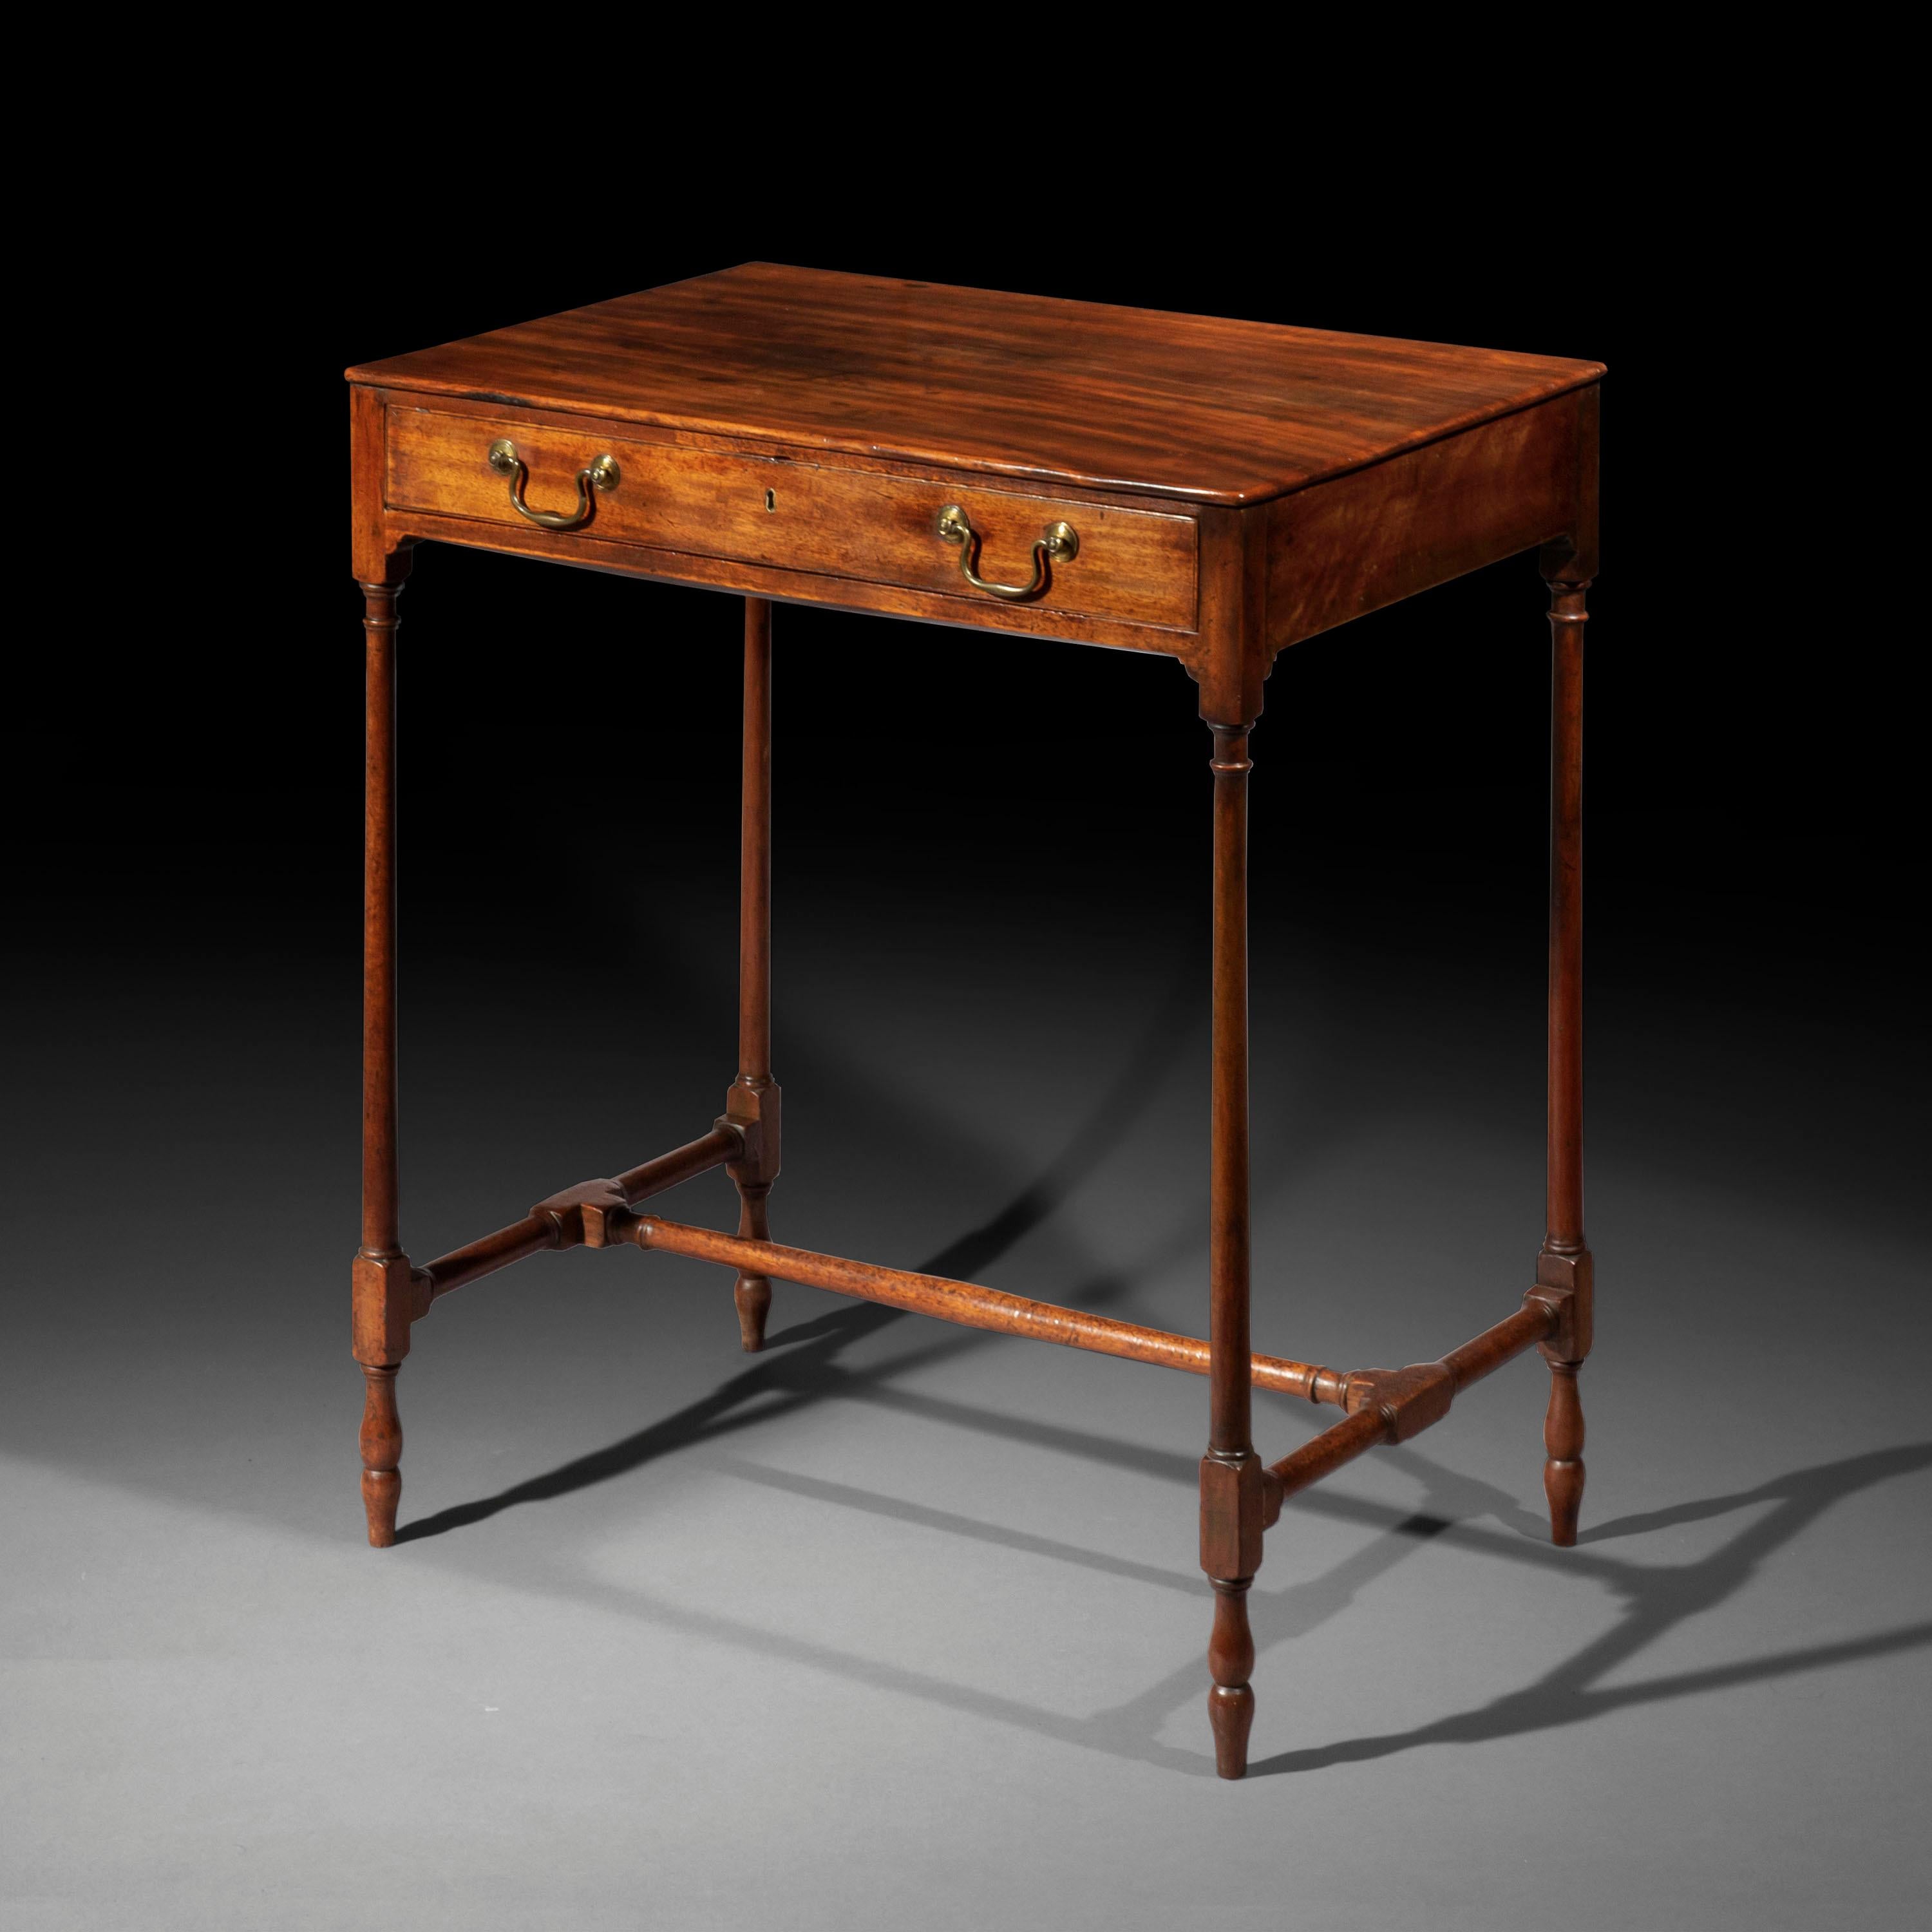 A rare 18th century George III Chippendale period 'Spider Leg' side table, attributable to ‘The Dumfries House Cabinet-Maker’.
English or Scottish, circa 1770.

Why we like it
We love the elegant simplicity of this table, the unusual thinness of its